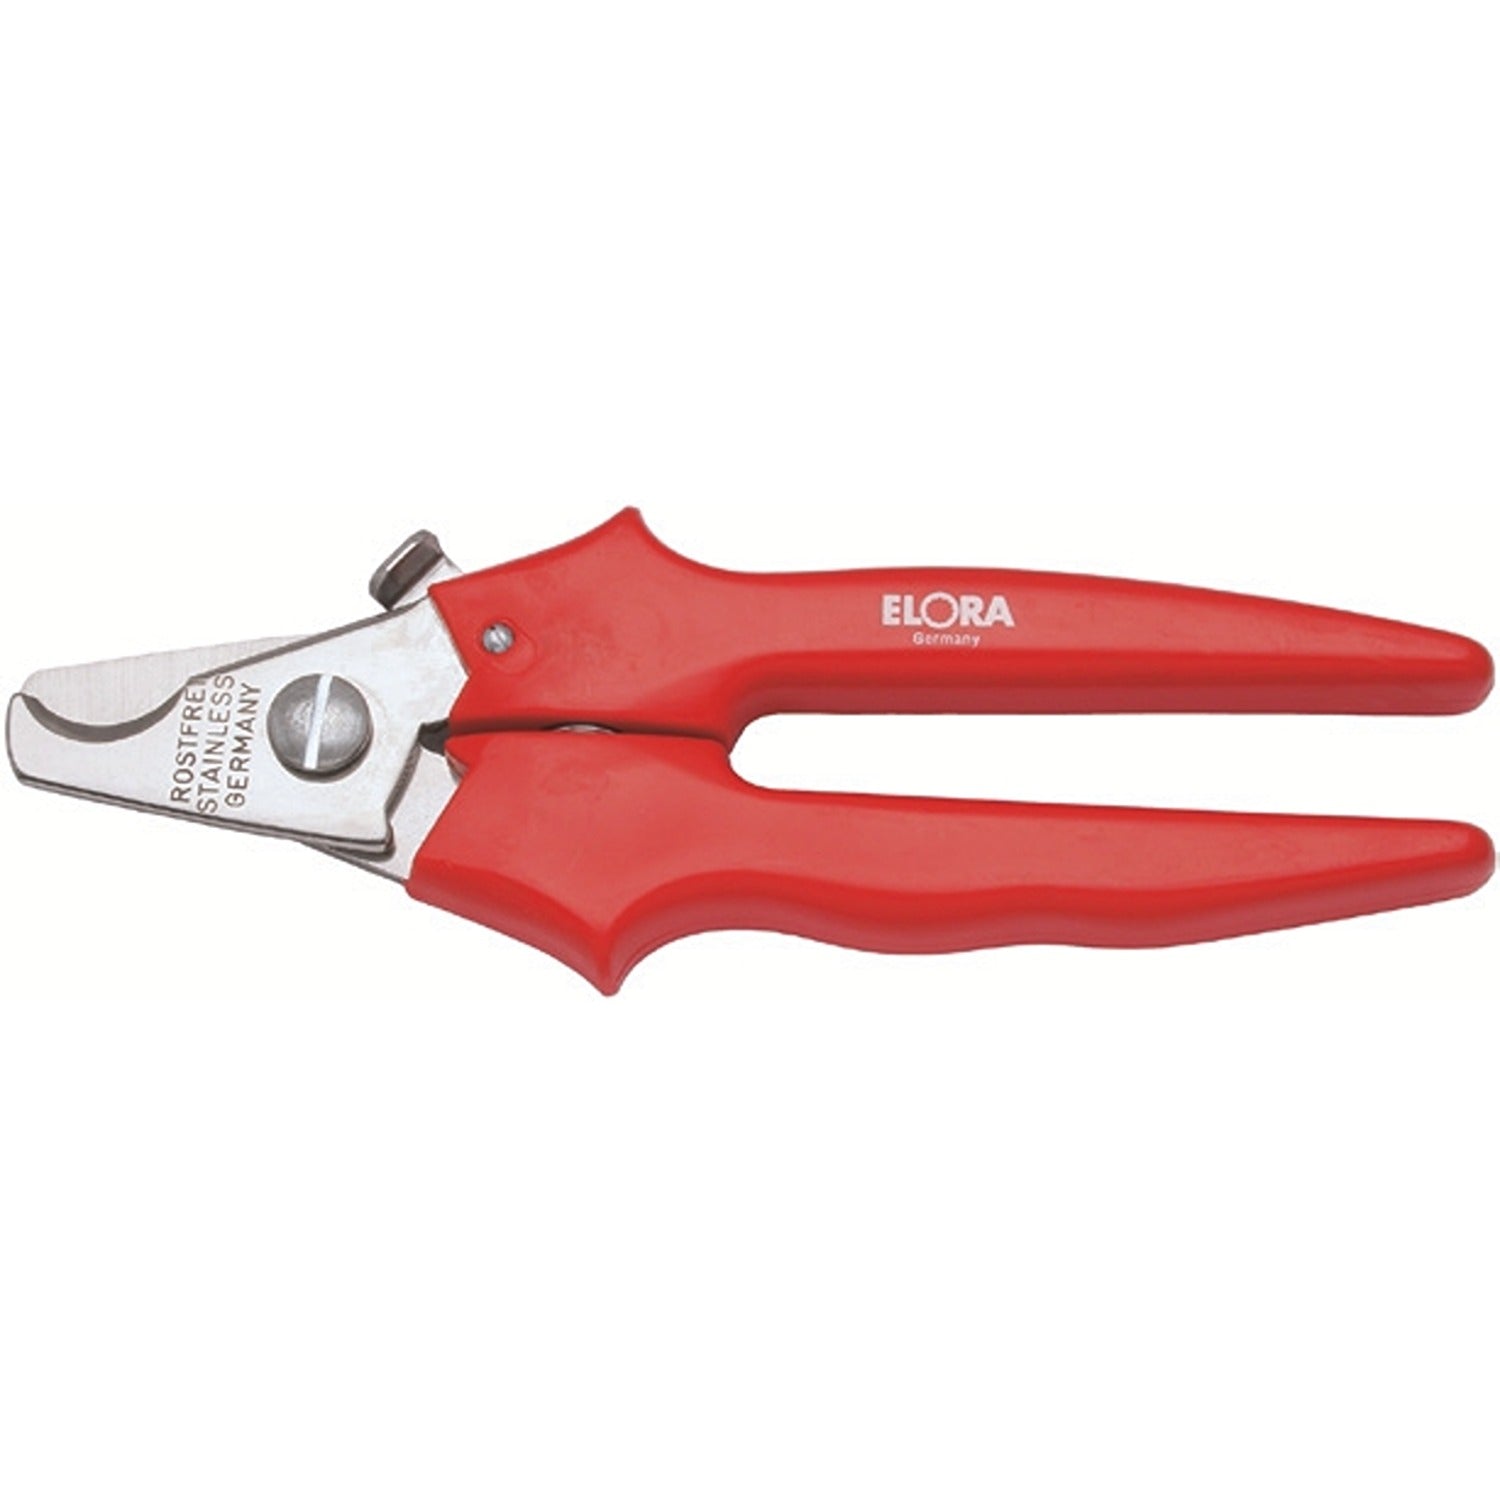 ELORA 498-7 Wire Snip For Wires (ELORA Tools) - Premium Wire Snip from ELORA - Shop now at Yew Aik.